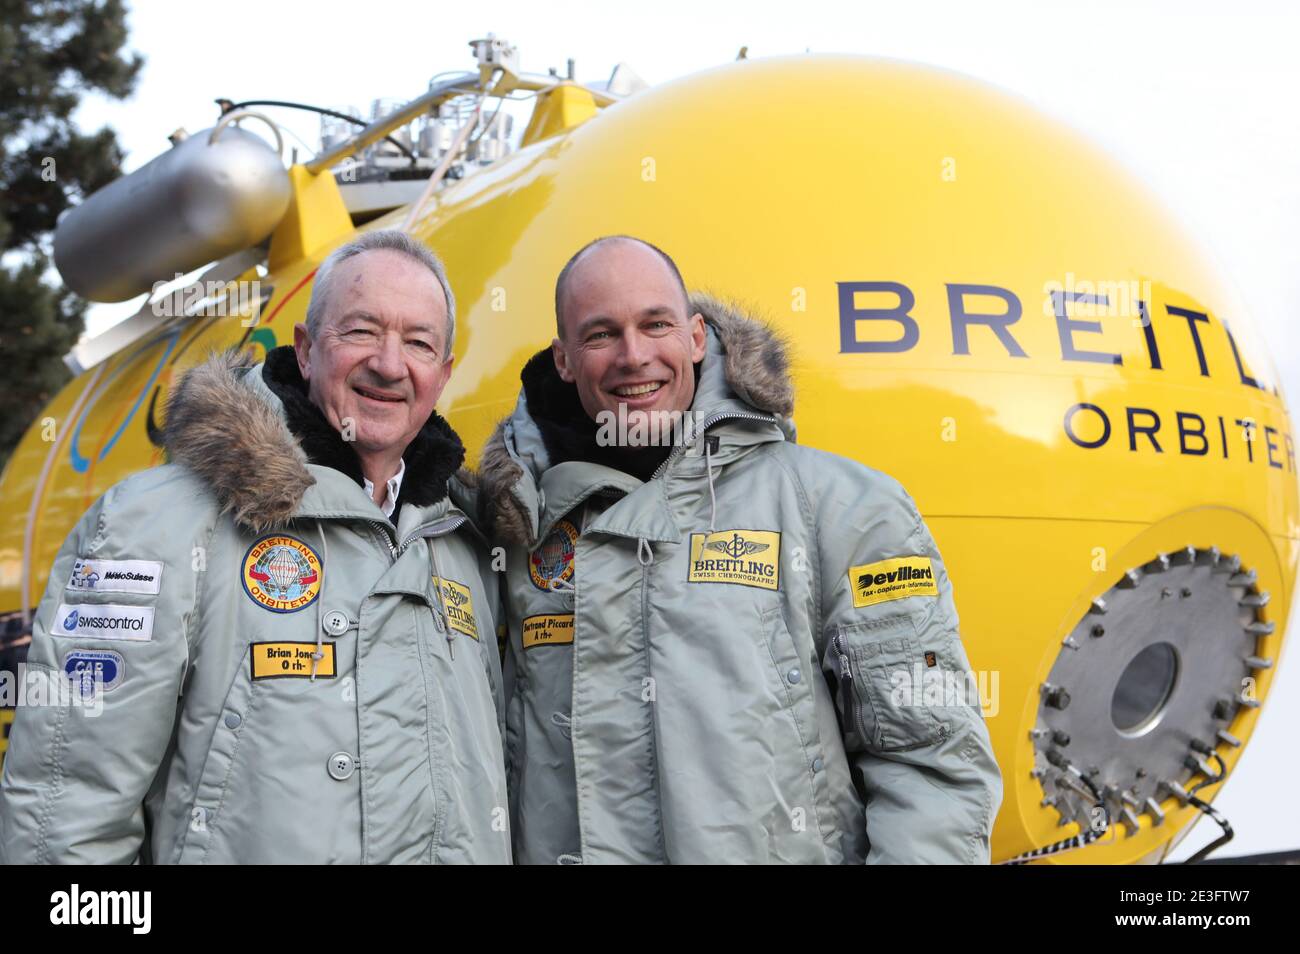 Brian Jones and Bertrand Piccard pose in Chateau-d'Oex, Switzerland on March 21, 2009. Bertrand Piccard (CH) and Brian Jones (GB) landed in the Egyptian desert on board the Breitling Orbiter 3. They had just completed the first non-stop round-the-world balloon flight, taking them 45,633 km from the Swiss village of Chateau-d'Oex in 19 days, 21 hours and 47 minutes. This flight, which broke 7 world records, remains the longest in effective distance and duration in the history of aviation. This 'Jules Verne dream', considered as the last great adventure of the 20th century, was initiated in the Stock Photo